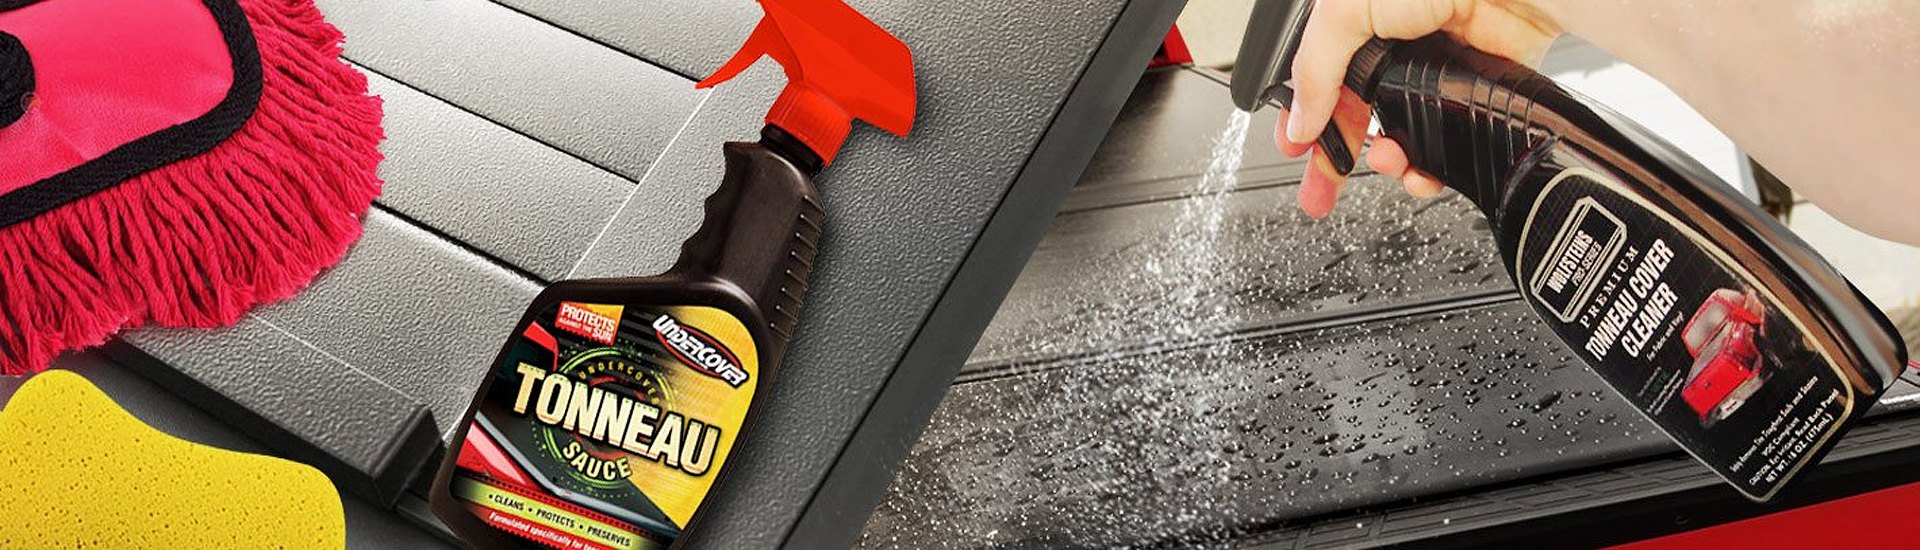 Tonneau Cover Cleaners & Protectors Remove The Dirt & Restore The Shine